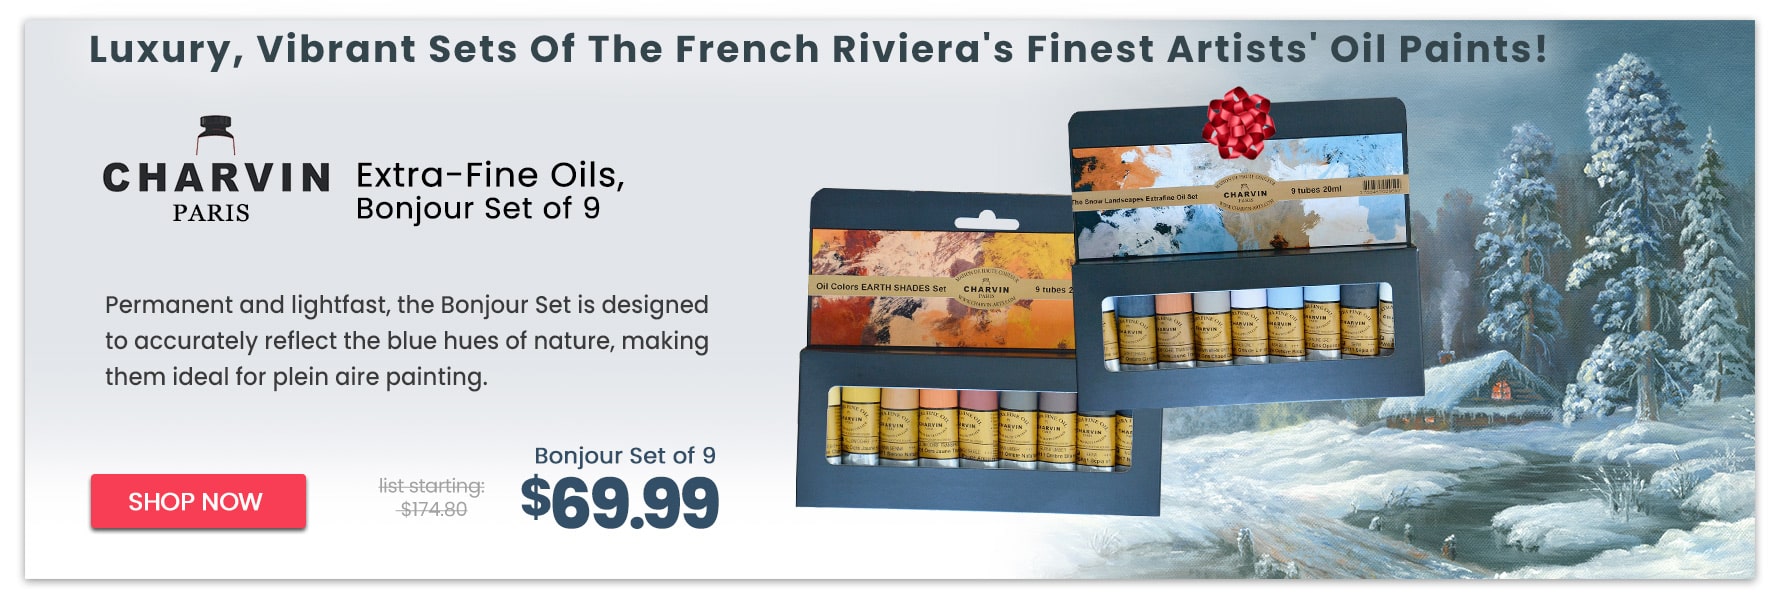 Charvin Extra-Fine Professional Oil Painting Bonjour Sets